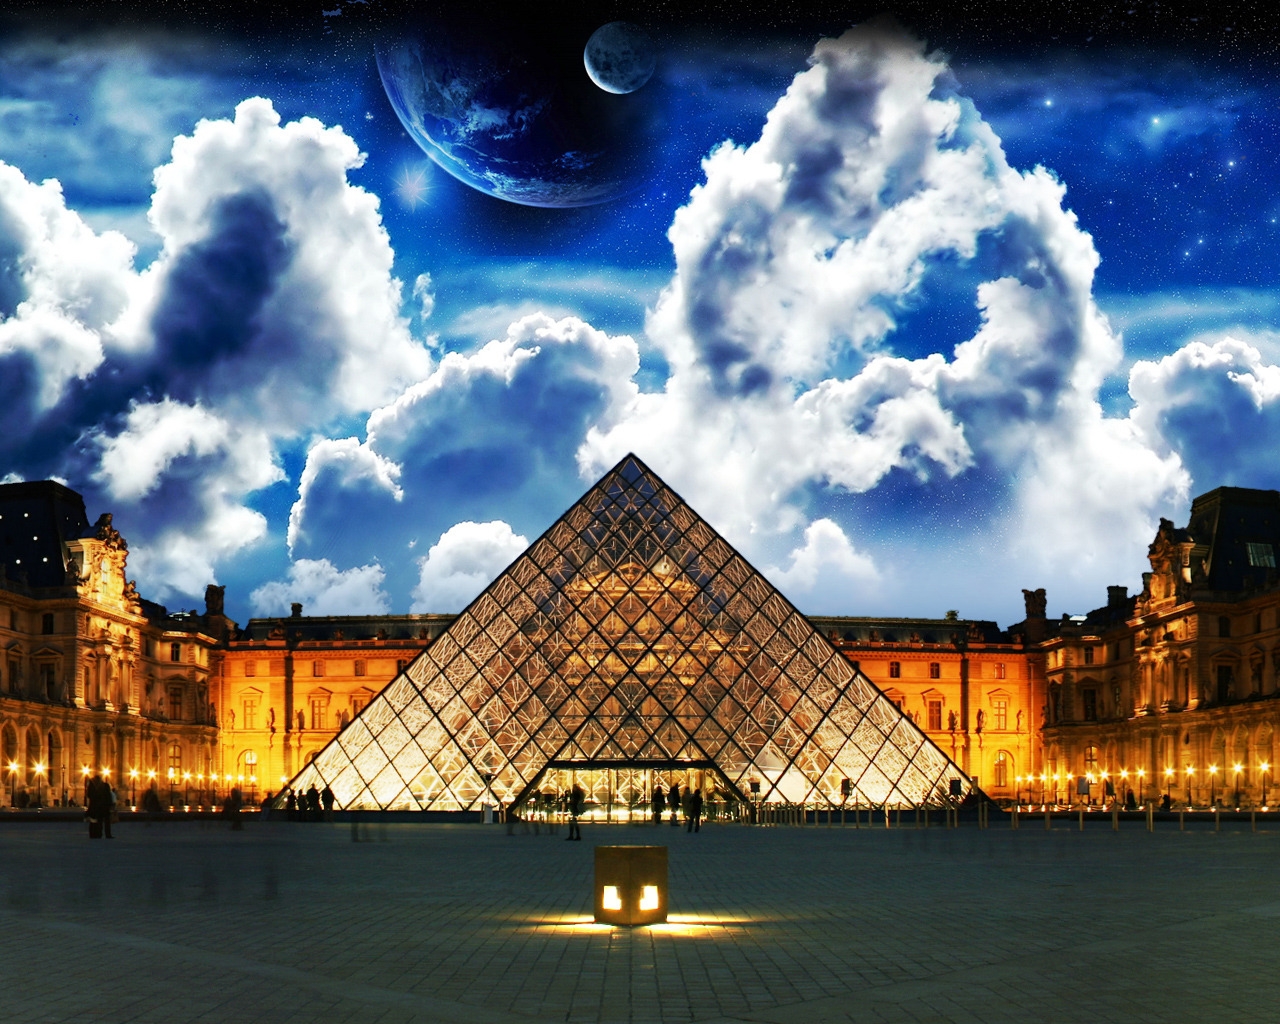 Over the Louvre for 1280 x 1024 resolution